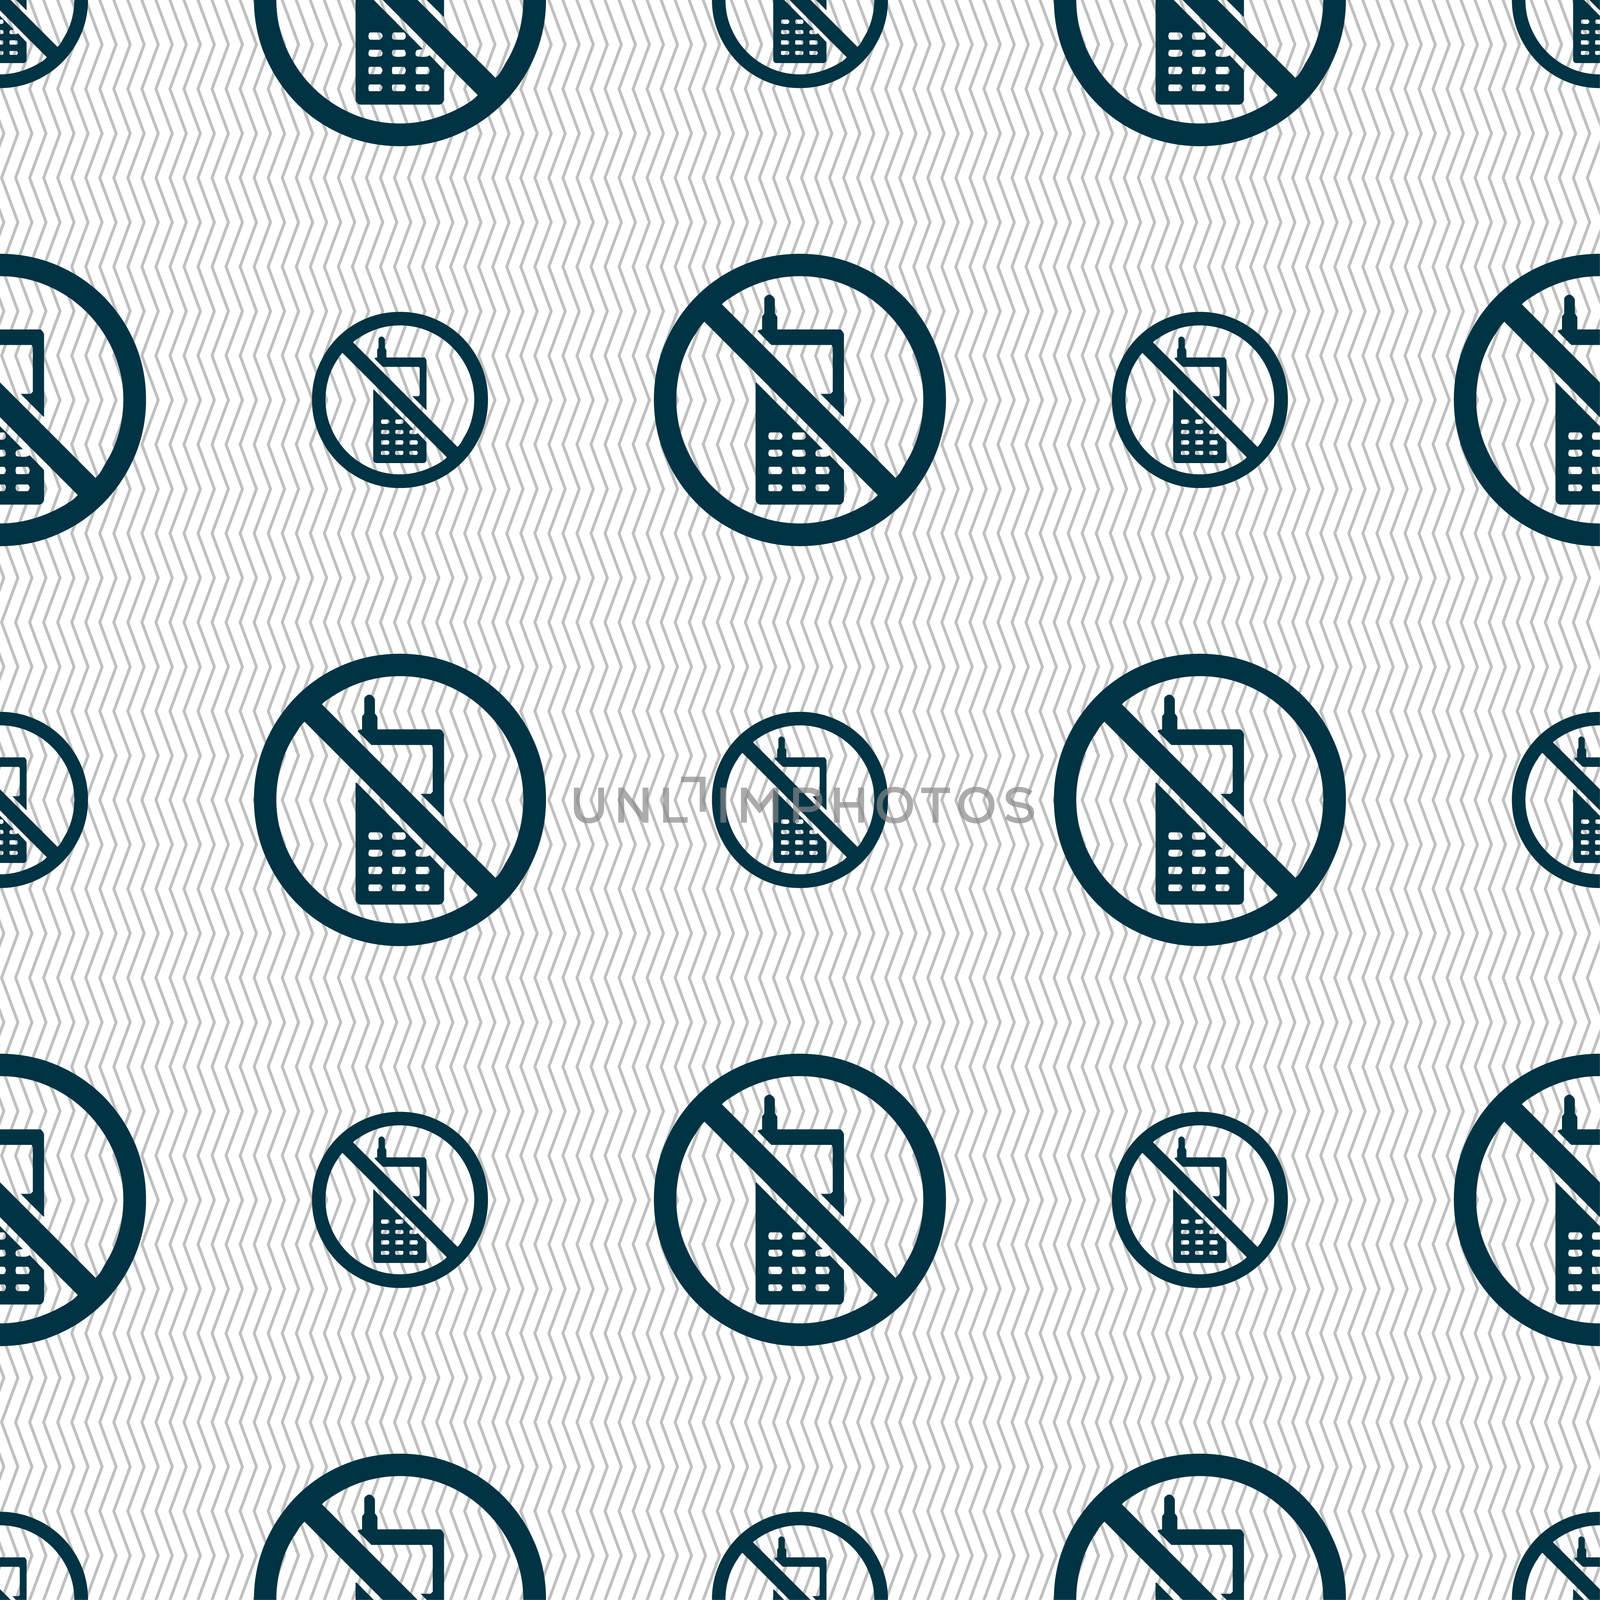 mobile phone is prohibited icon sign. Seamless pattern with geometric texture. illustration